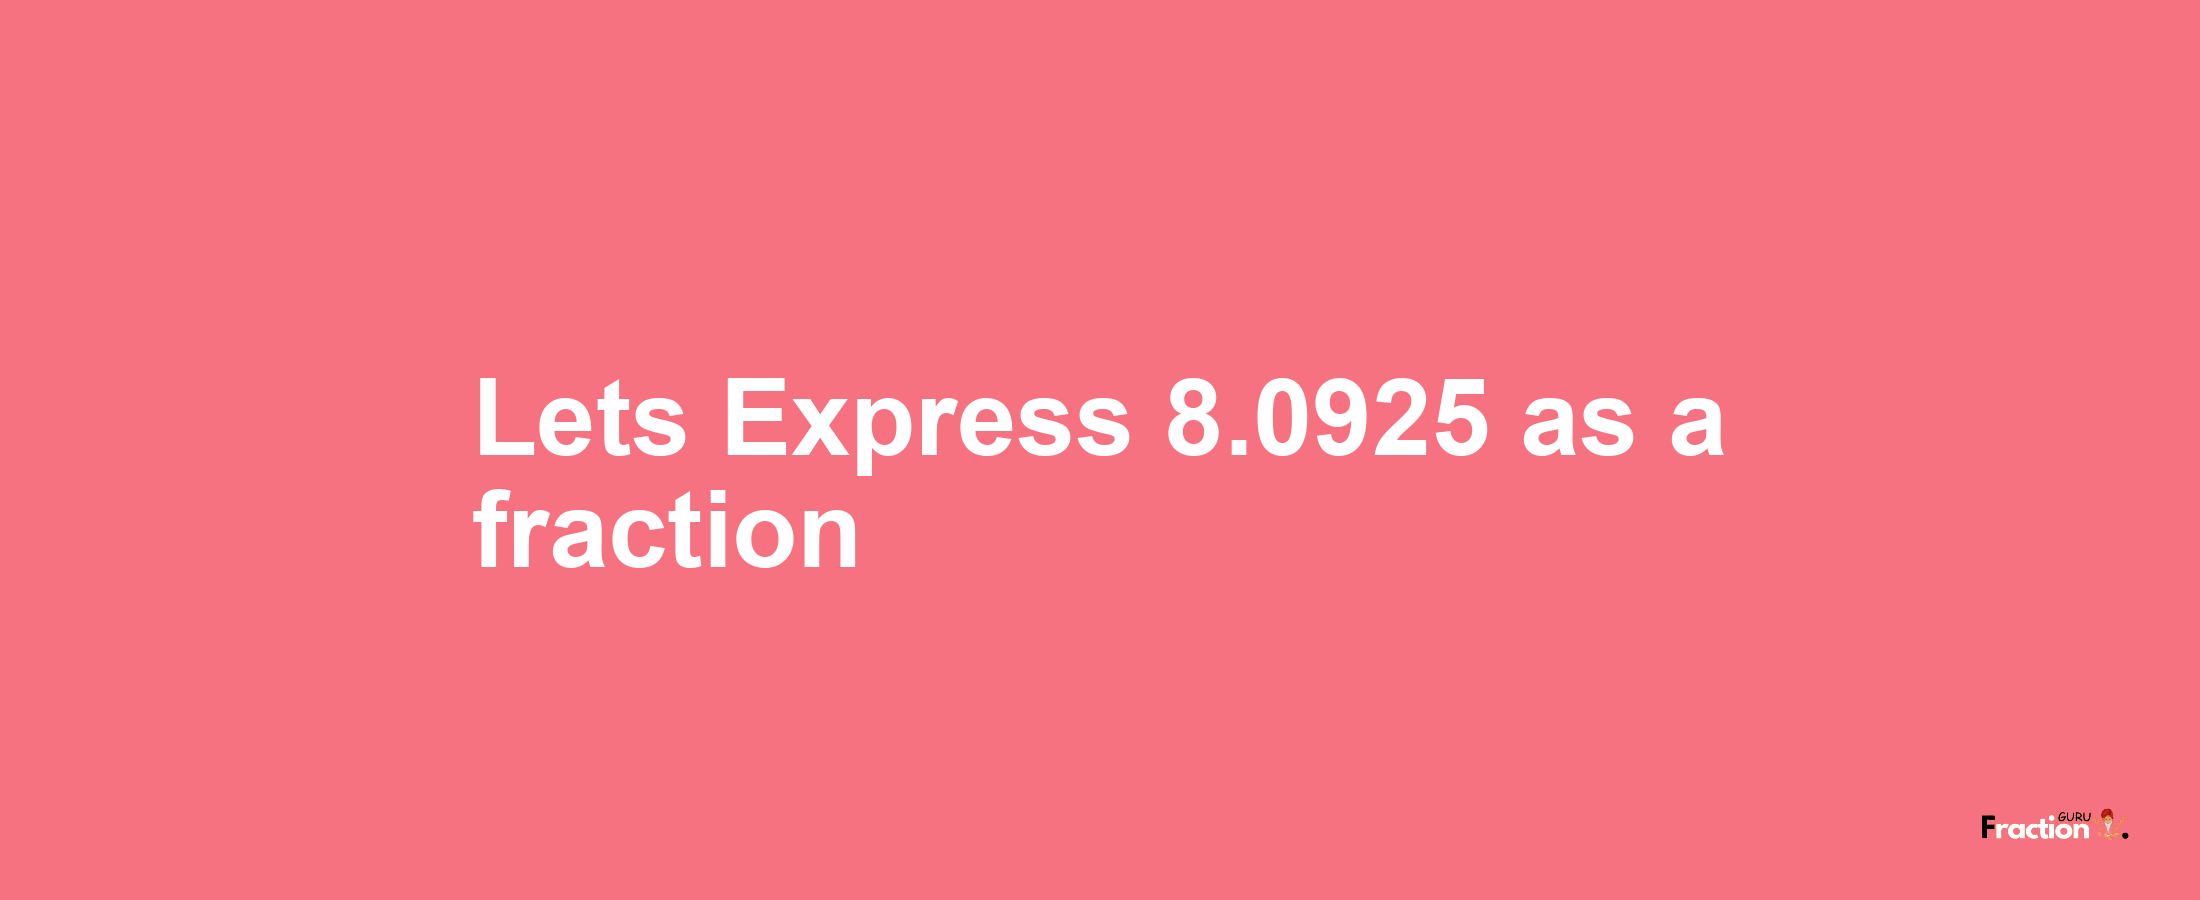 Lets Express 8.0925 as afraction